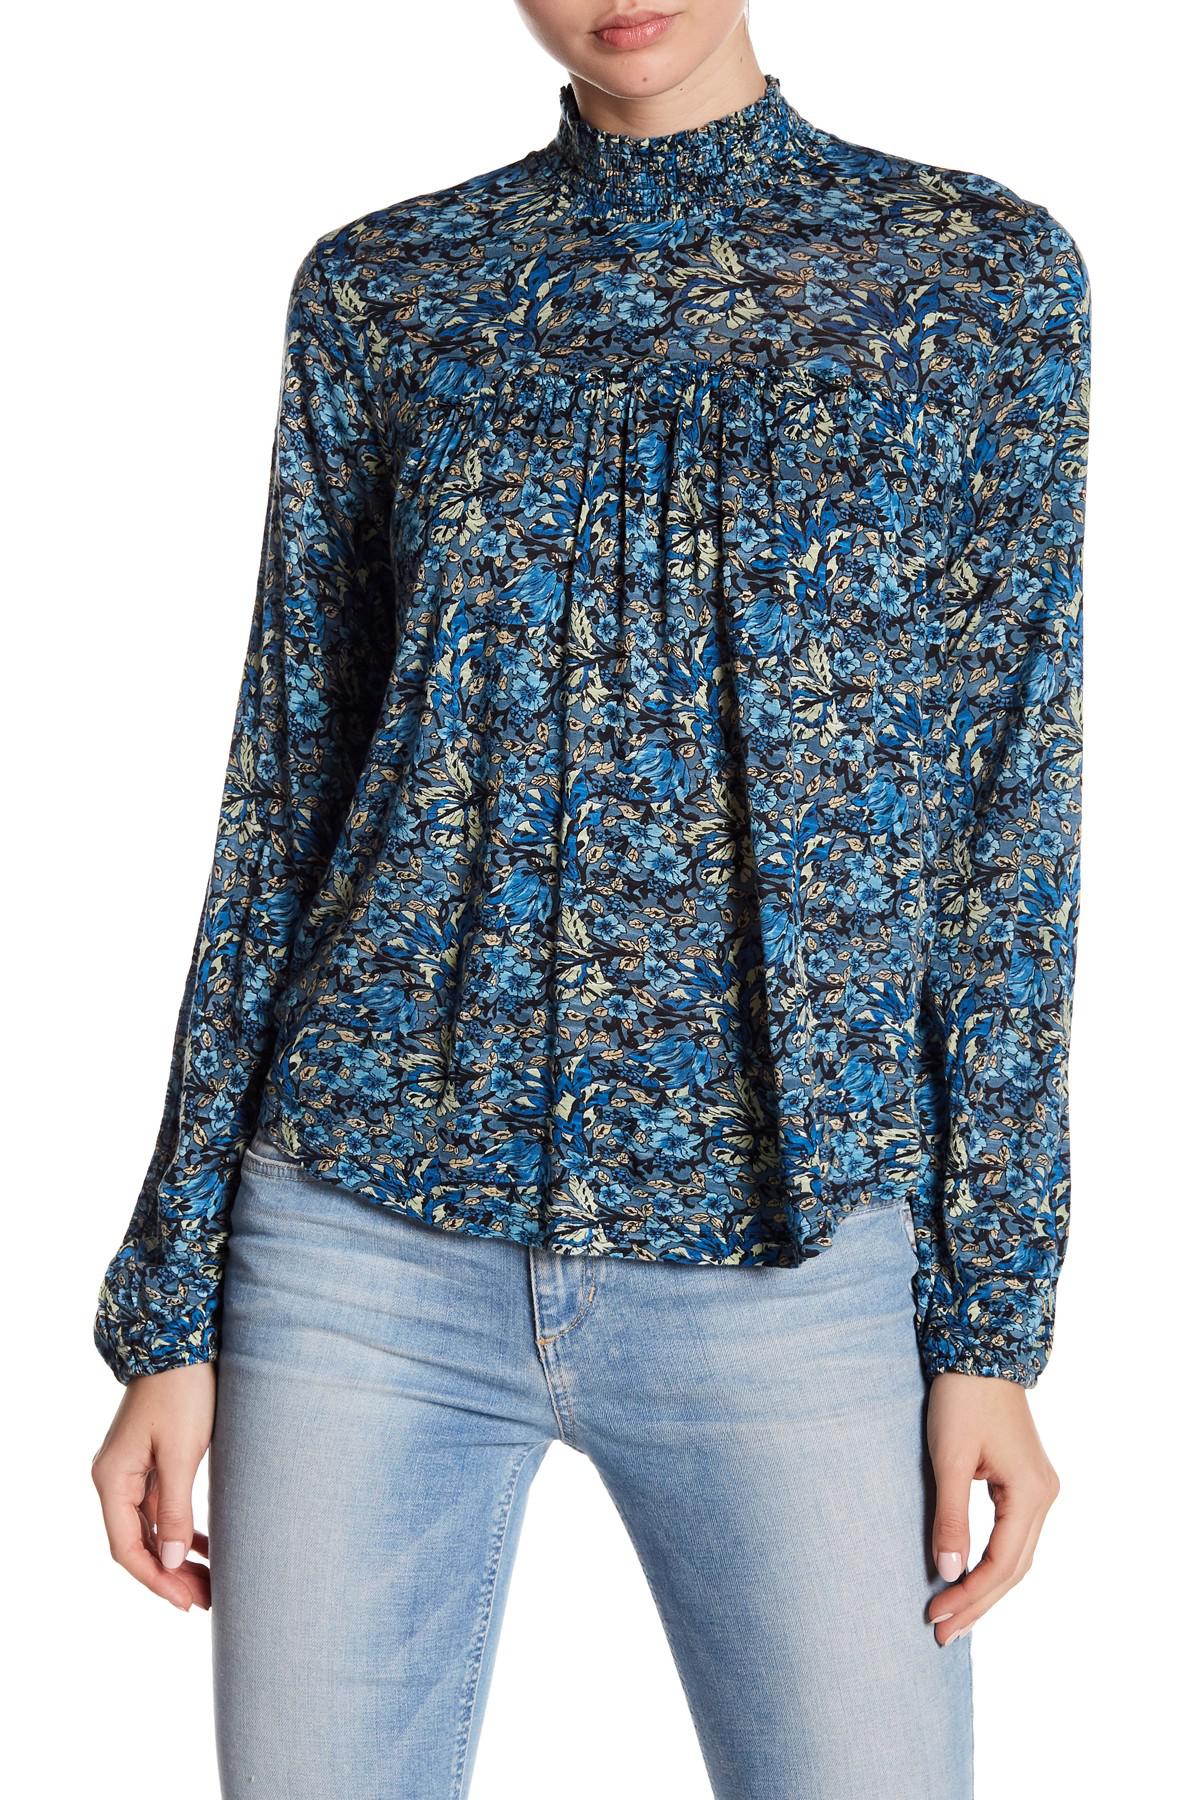 Lyst - Lucky Brand Mock Neck Floral Top in Blue